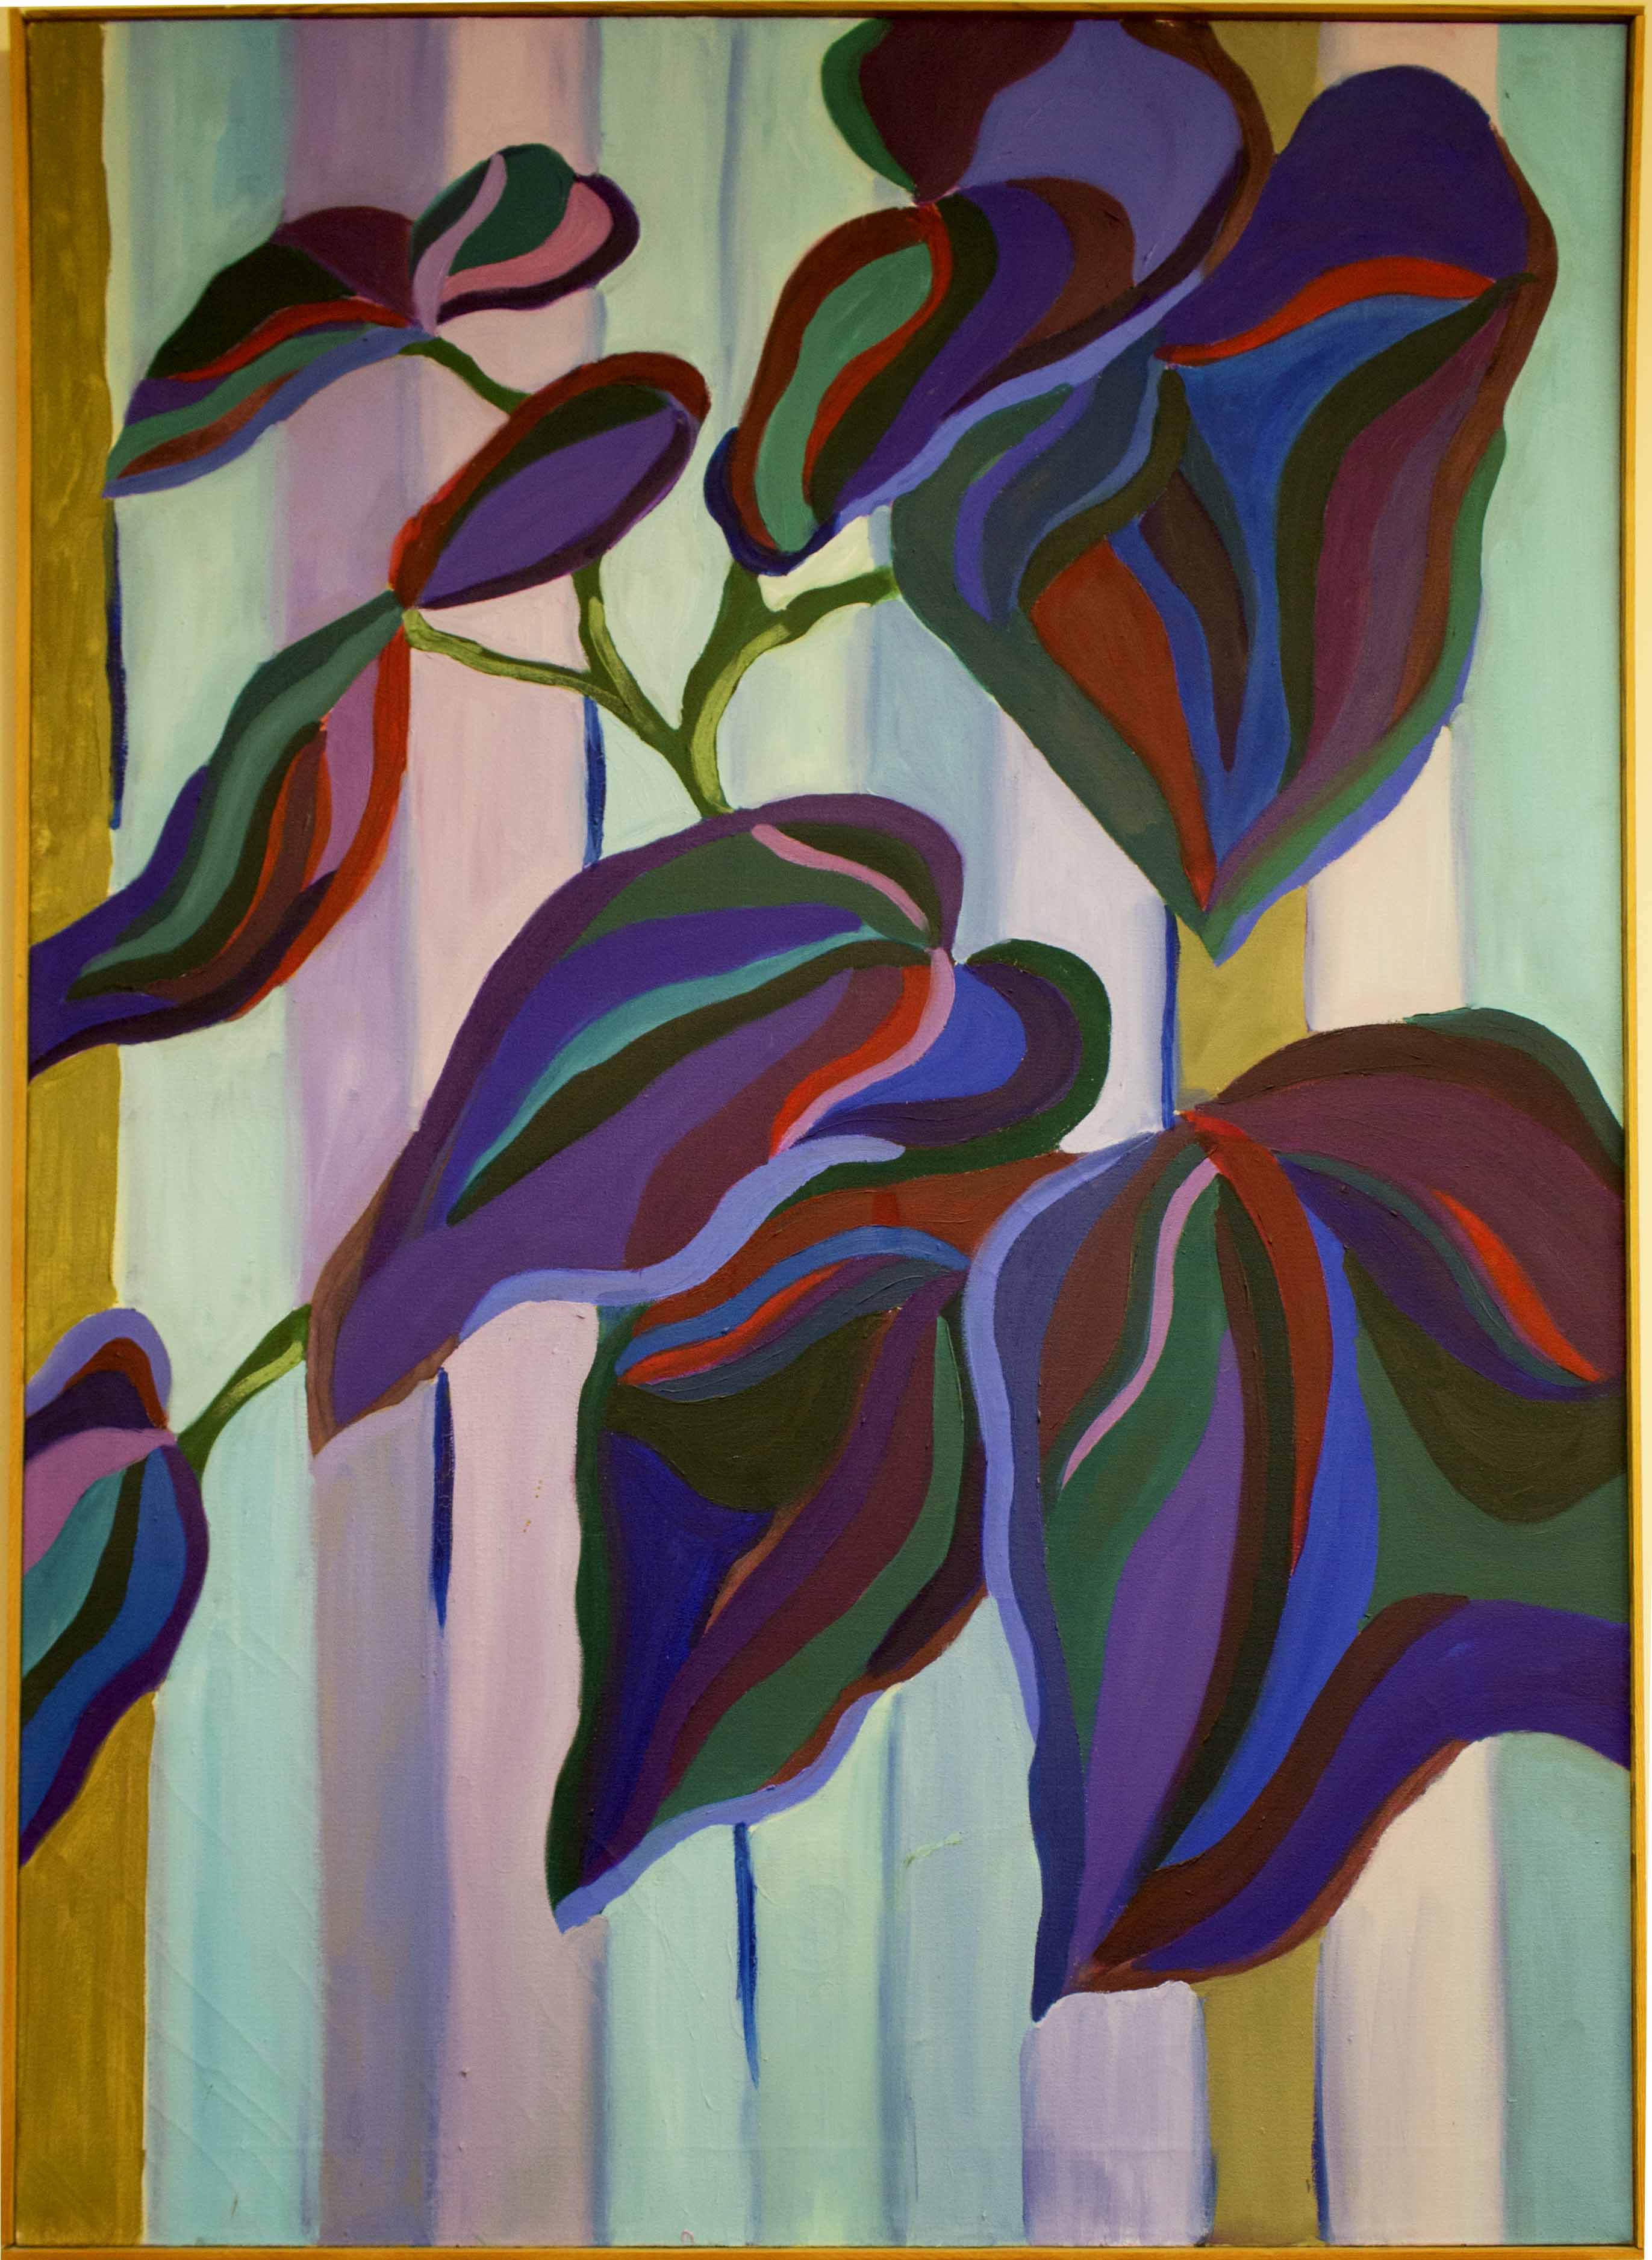 Painting of leaves on a purple, blue, and yellow striped background.